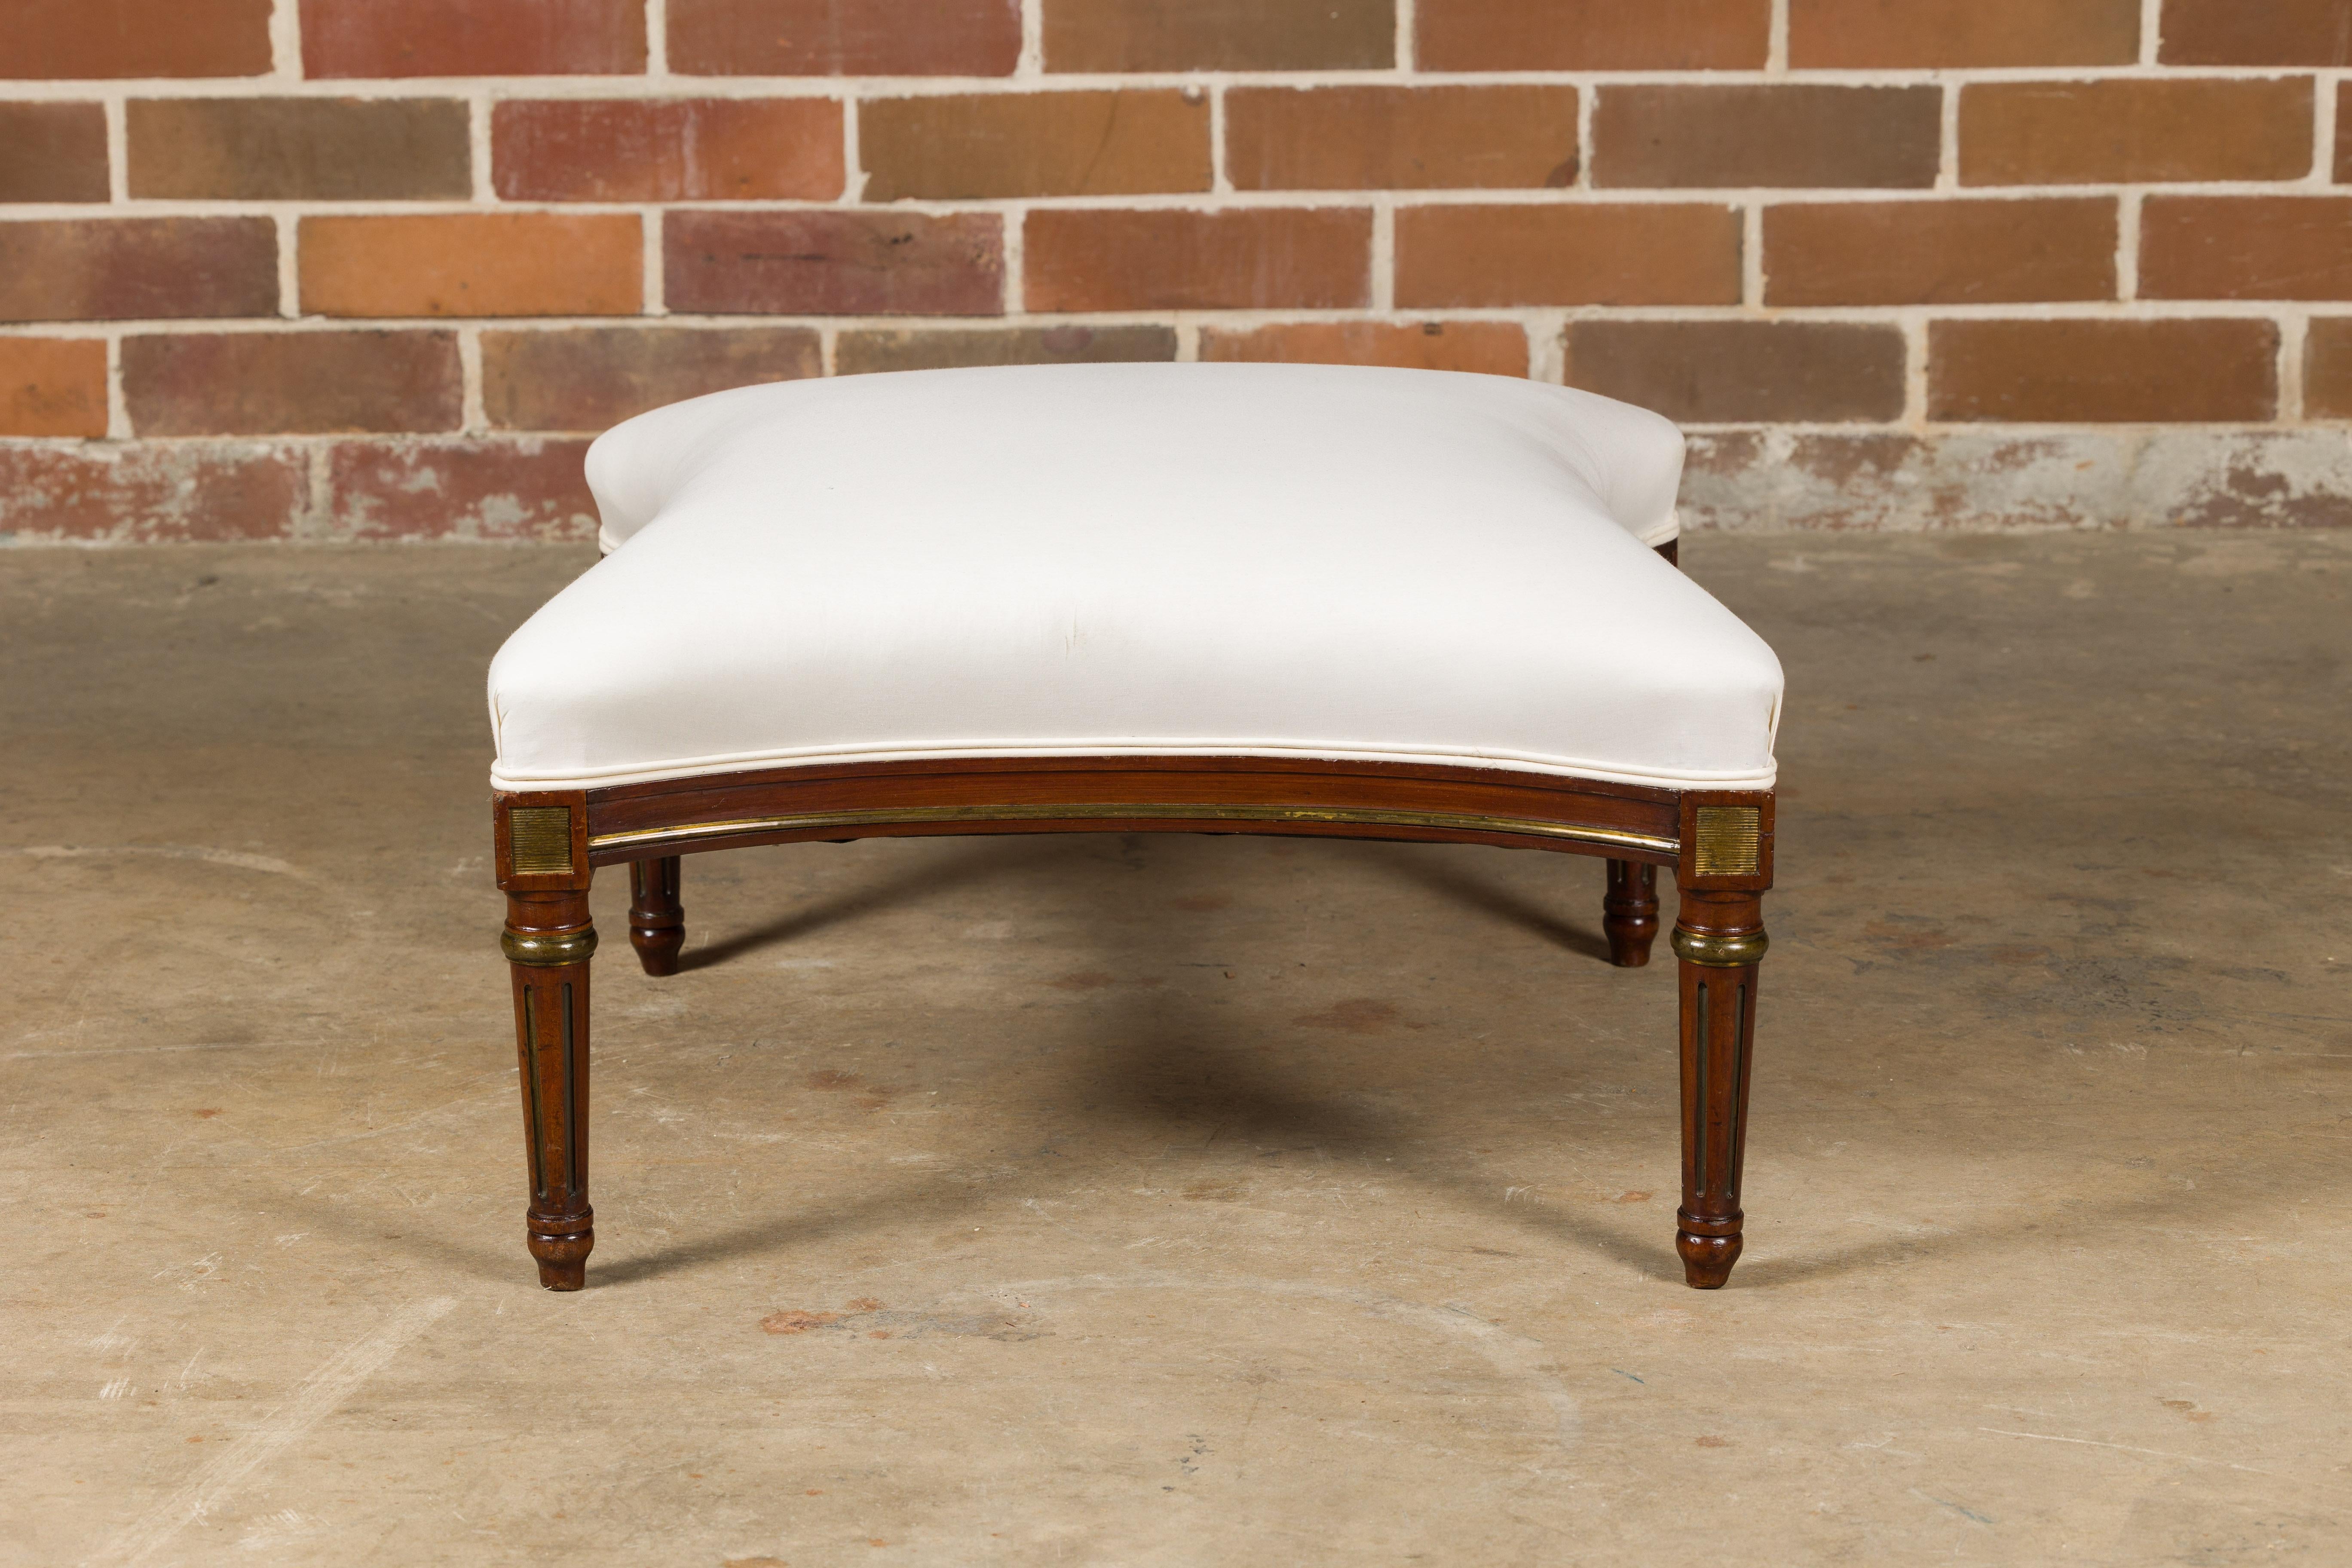 A French Louis XVI style wooden ottoman from circa 1900 with fluted tapering legs, gilded accents and muslin double welt upholstery. Immerse yourself in the elegance of French design with this Louis XVI style wooden ottoman from circa 1900, a piece